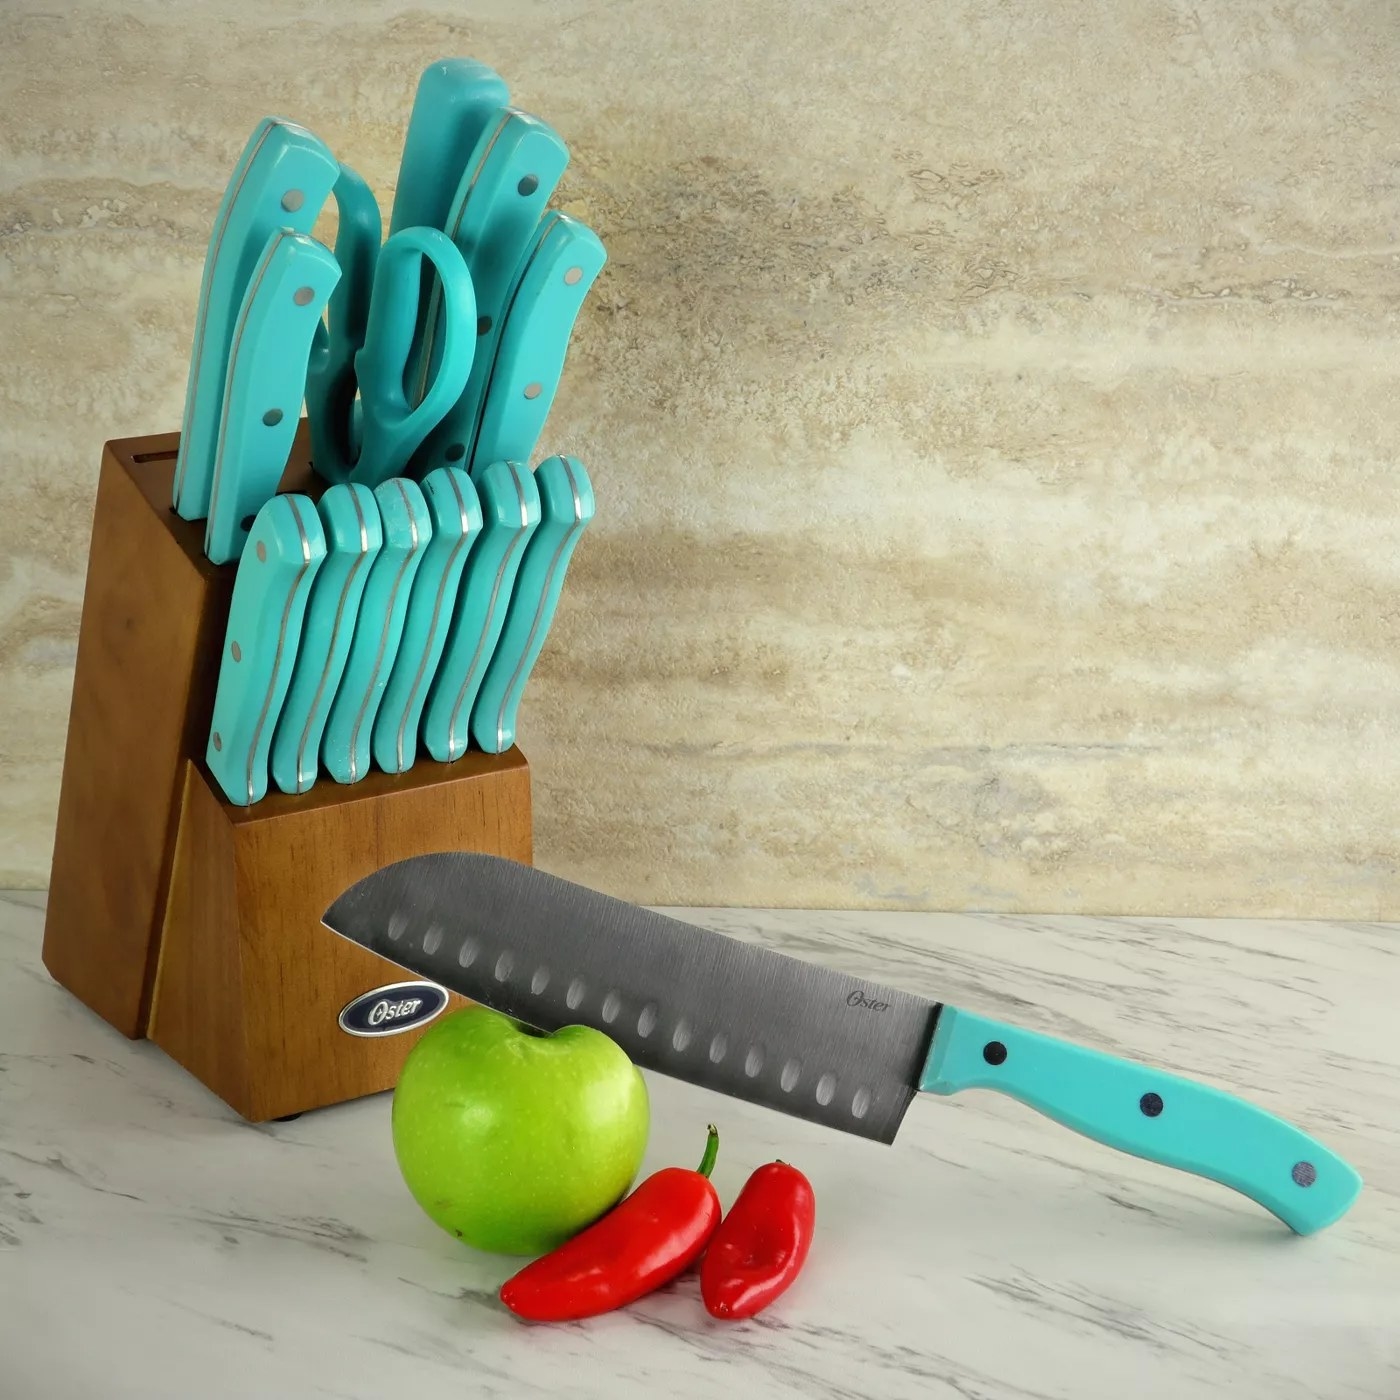 The knives in wood block with one slicing an apple